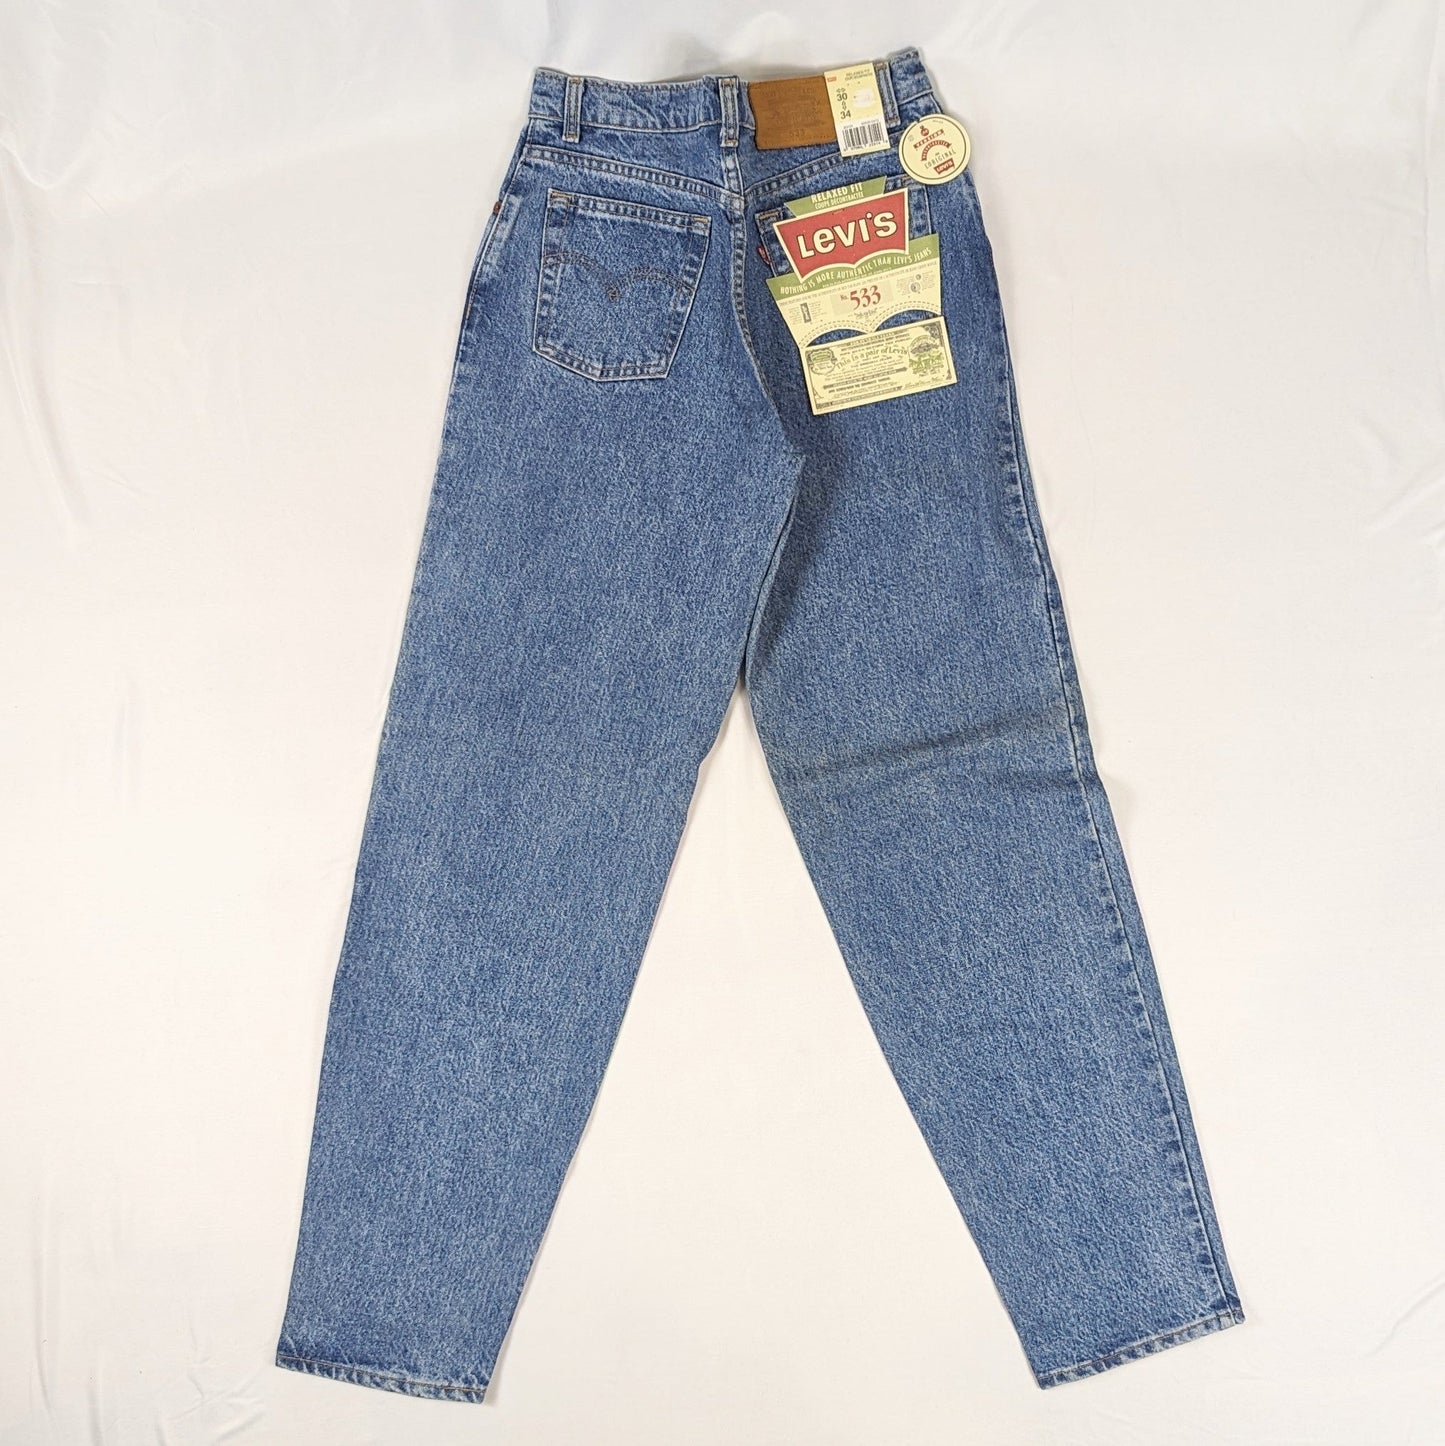 Levis jeans vintage 90s relaxed fit made in Canada 30x34